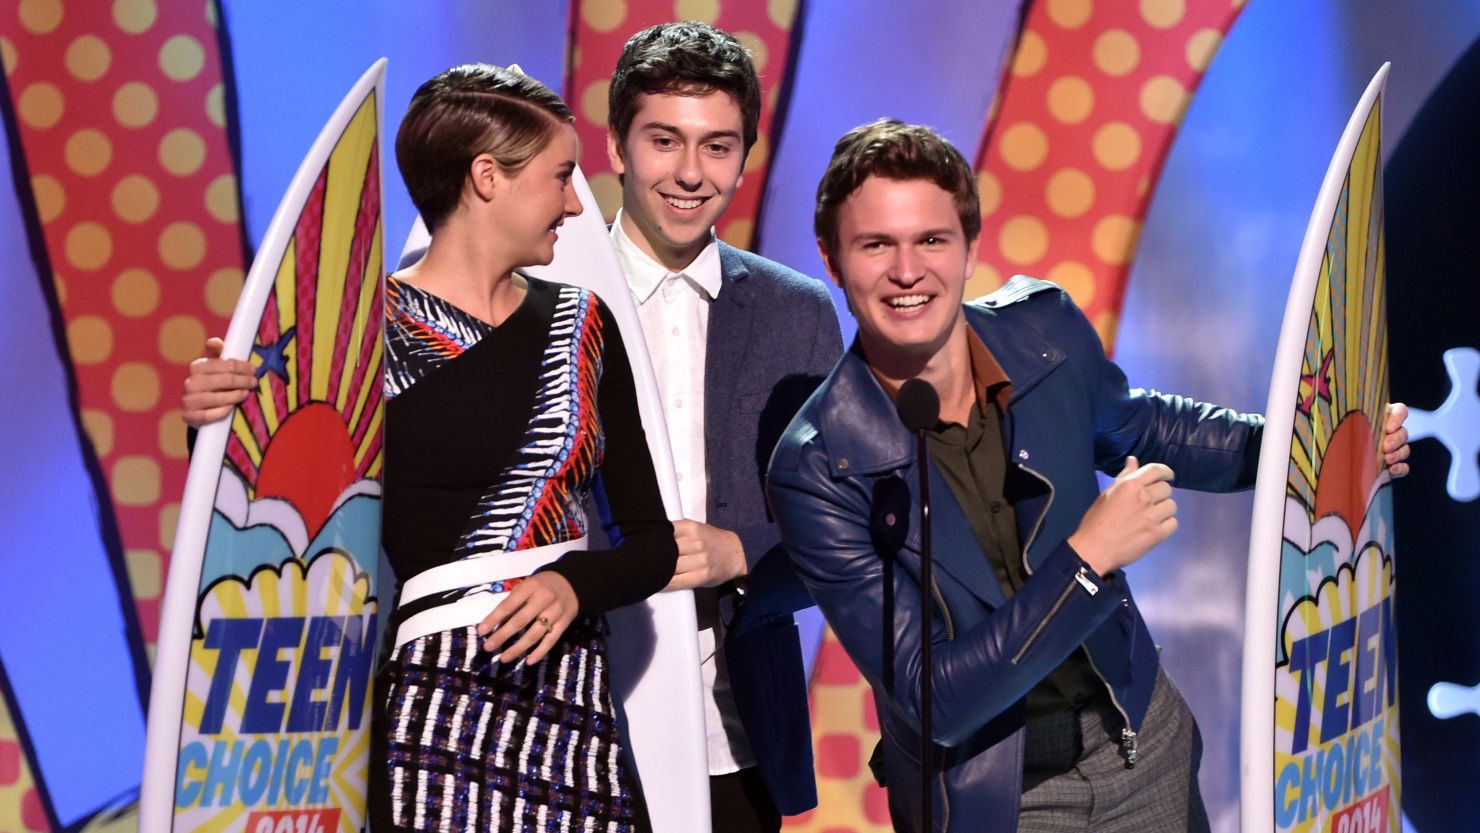 Shailene Woodley, Nat Wolff and Ansel Elgort won the Teen Choice Award for movie chemistry with "The Fault In Our Stars."